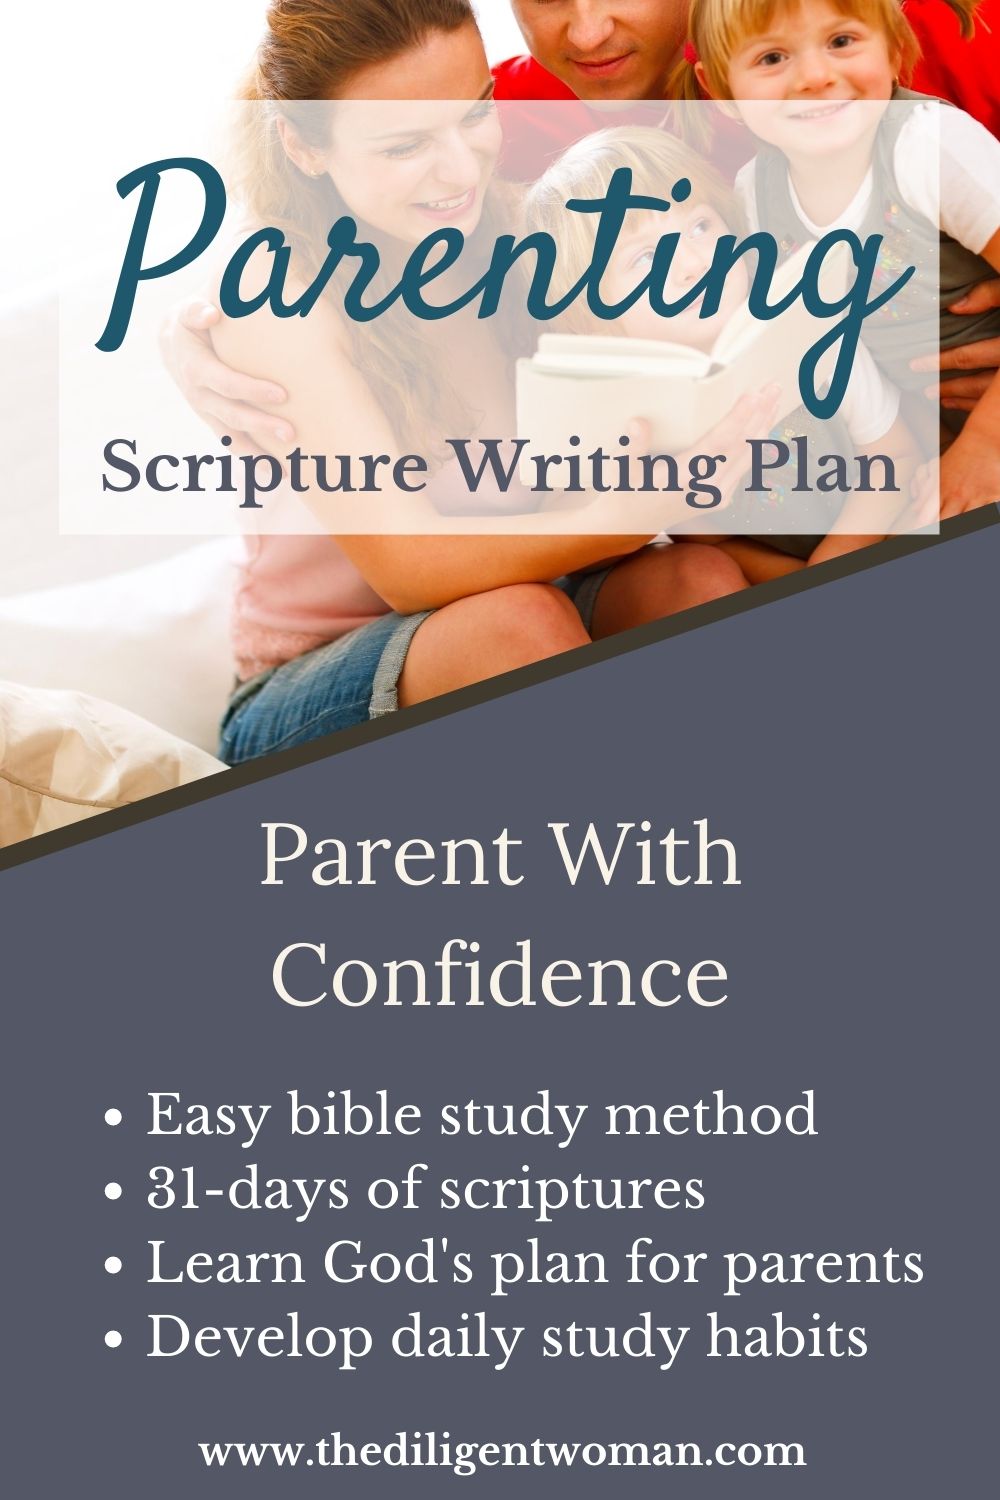 Scriptures about Parenting. The Bible is full of examples for parents to use as they raise their own children. For the next 31 days, join us as we learn some truths that can be used or taught through the parenting journey.